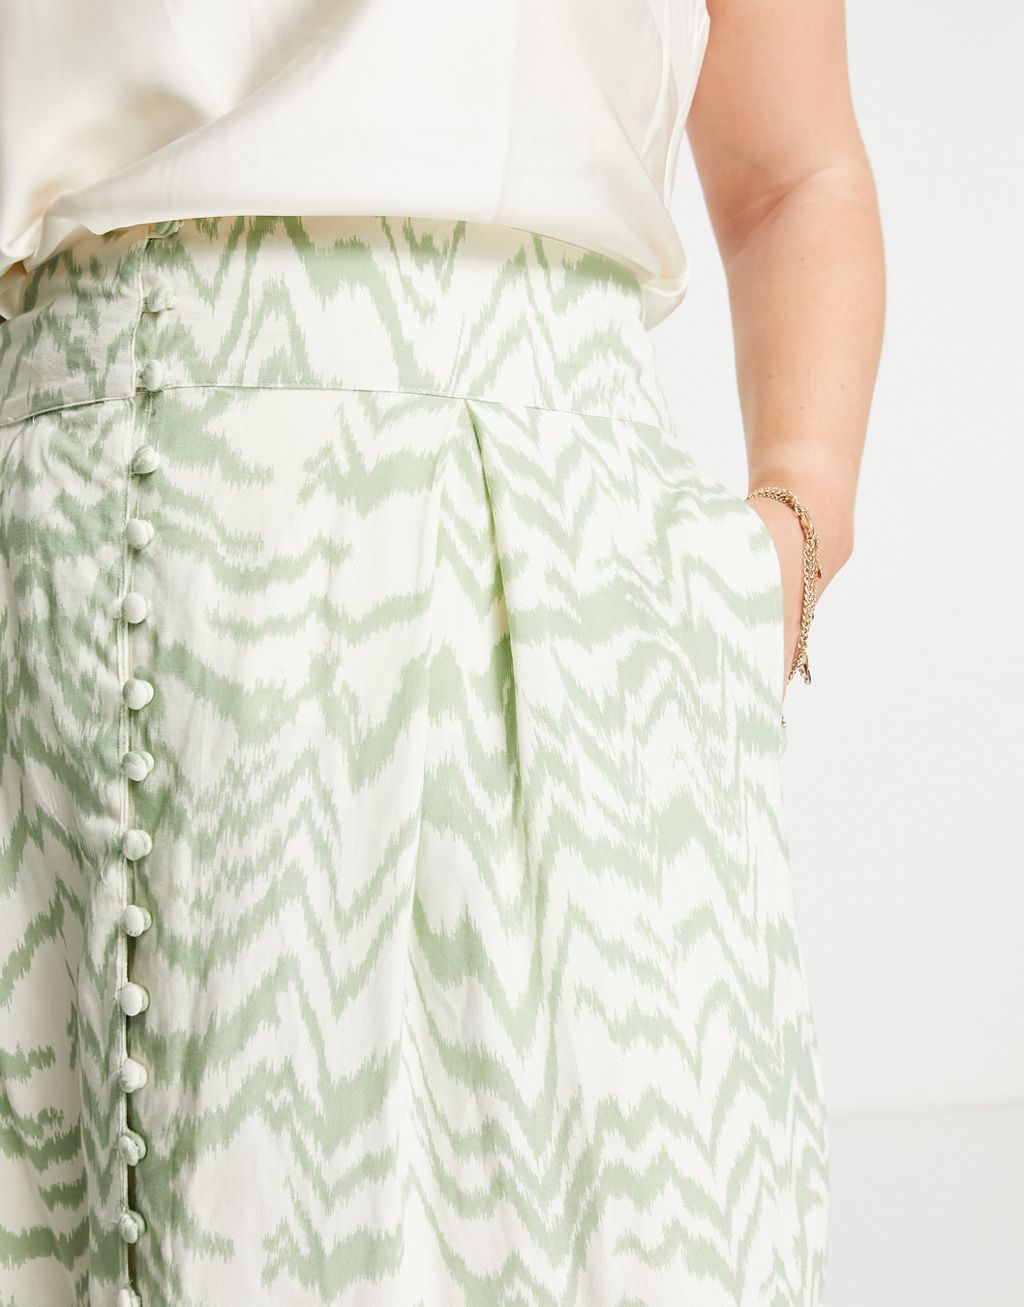 Plus-size skirt by ASOS DESIGN Always here for animal print High rise Button-through front Functional pockets Side splits Regular fit Sold by Asos